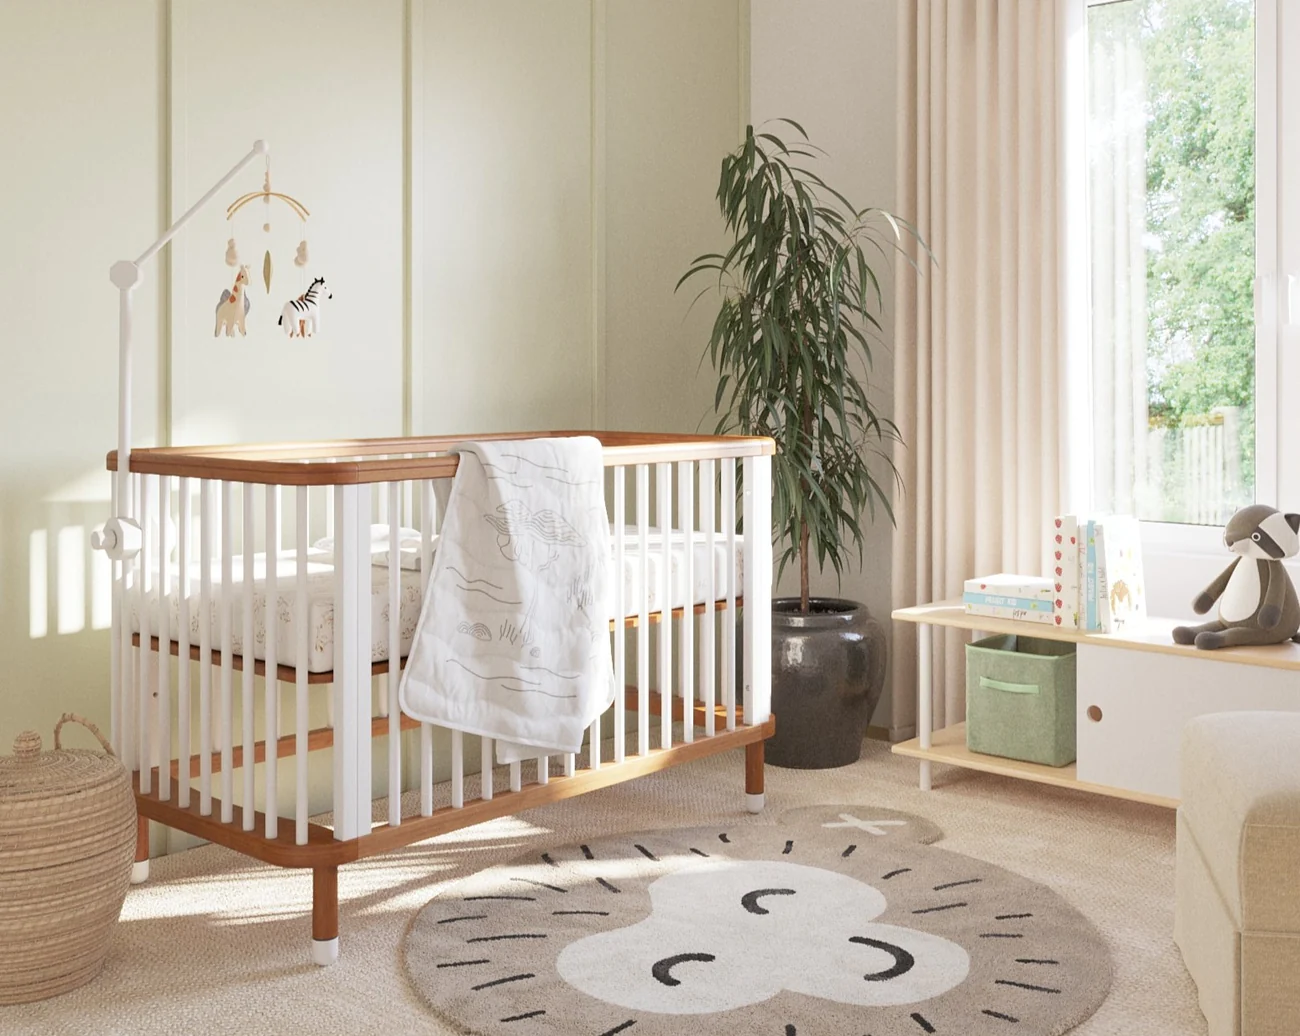 How to Design a Darling Themed Nursery